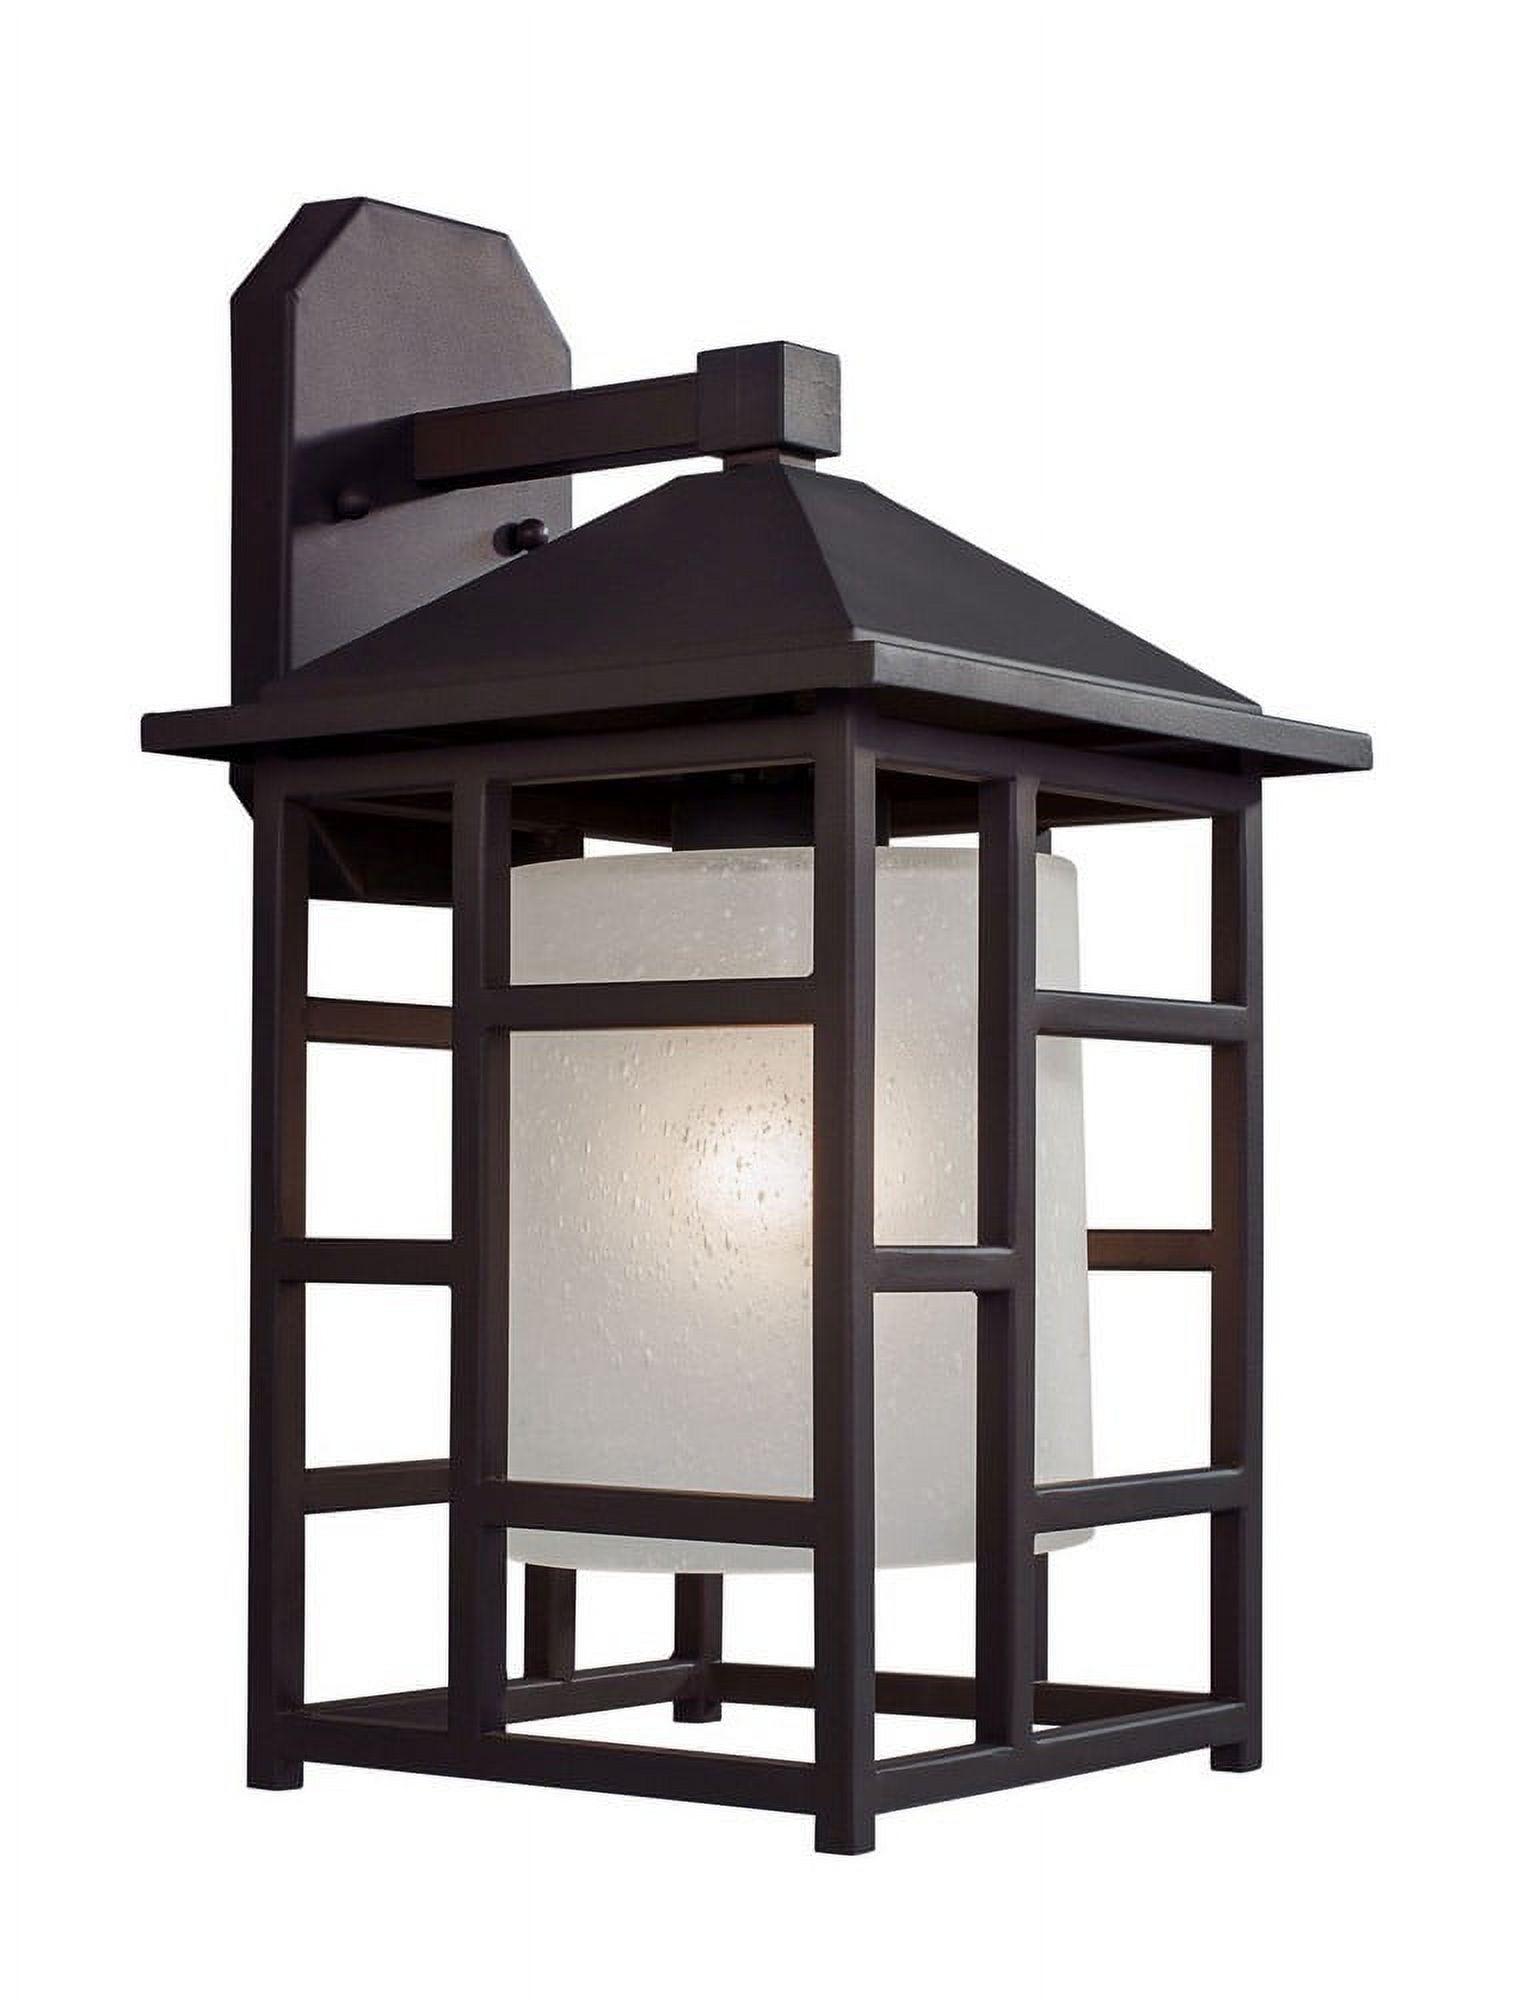 Forte Lighting 1248-01 1 Light 15" High Outdoor Wall Sconce - Bronze - image 1 of 4